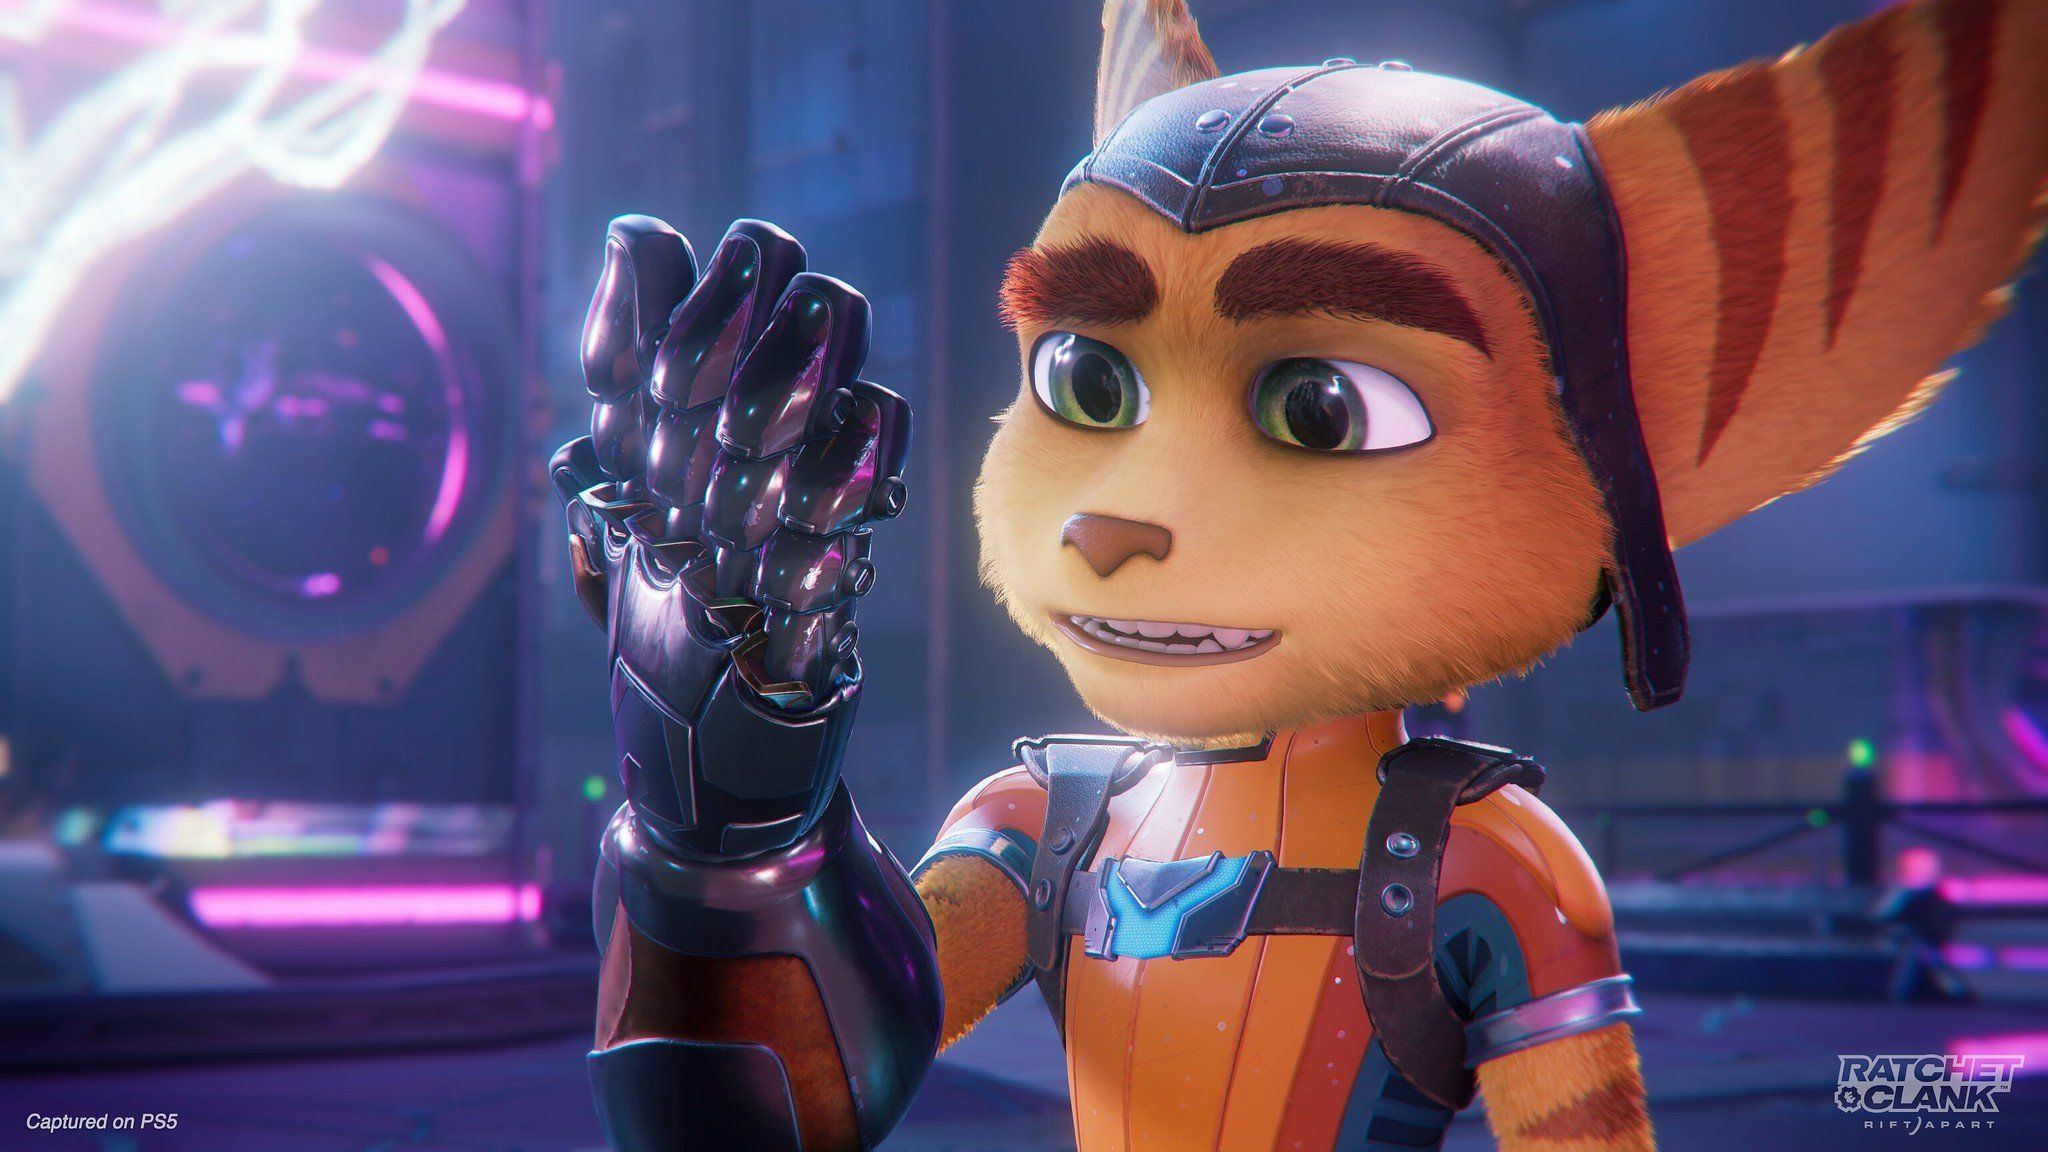 Gallery: Ratchet & Clank: Rift Apart Drops Jaws in New PS5 Screenshots